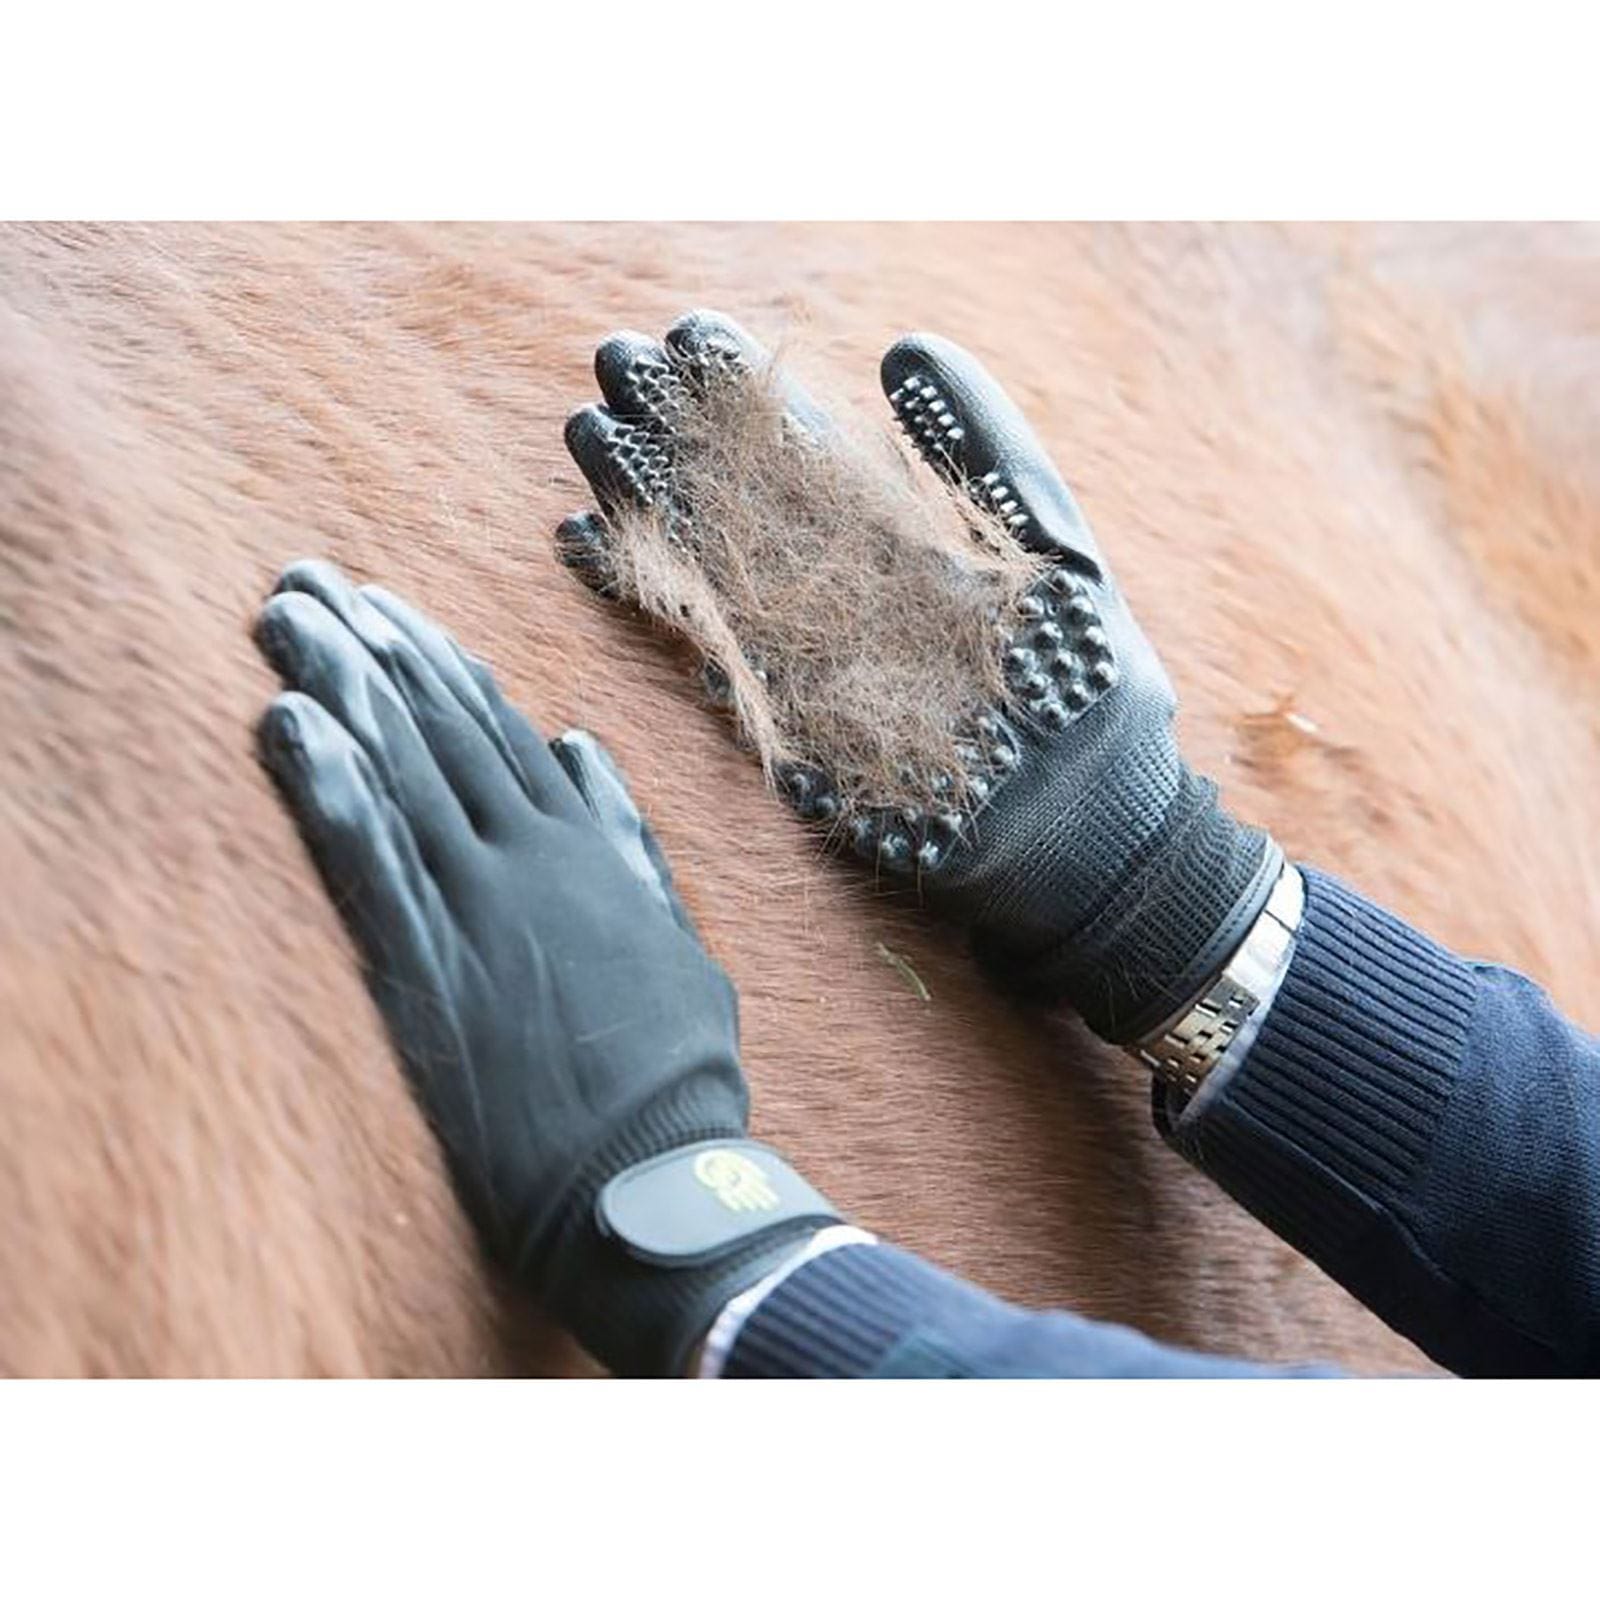 hands on grooming gloves